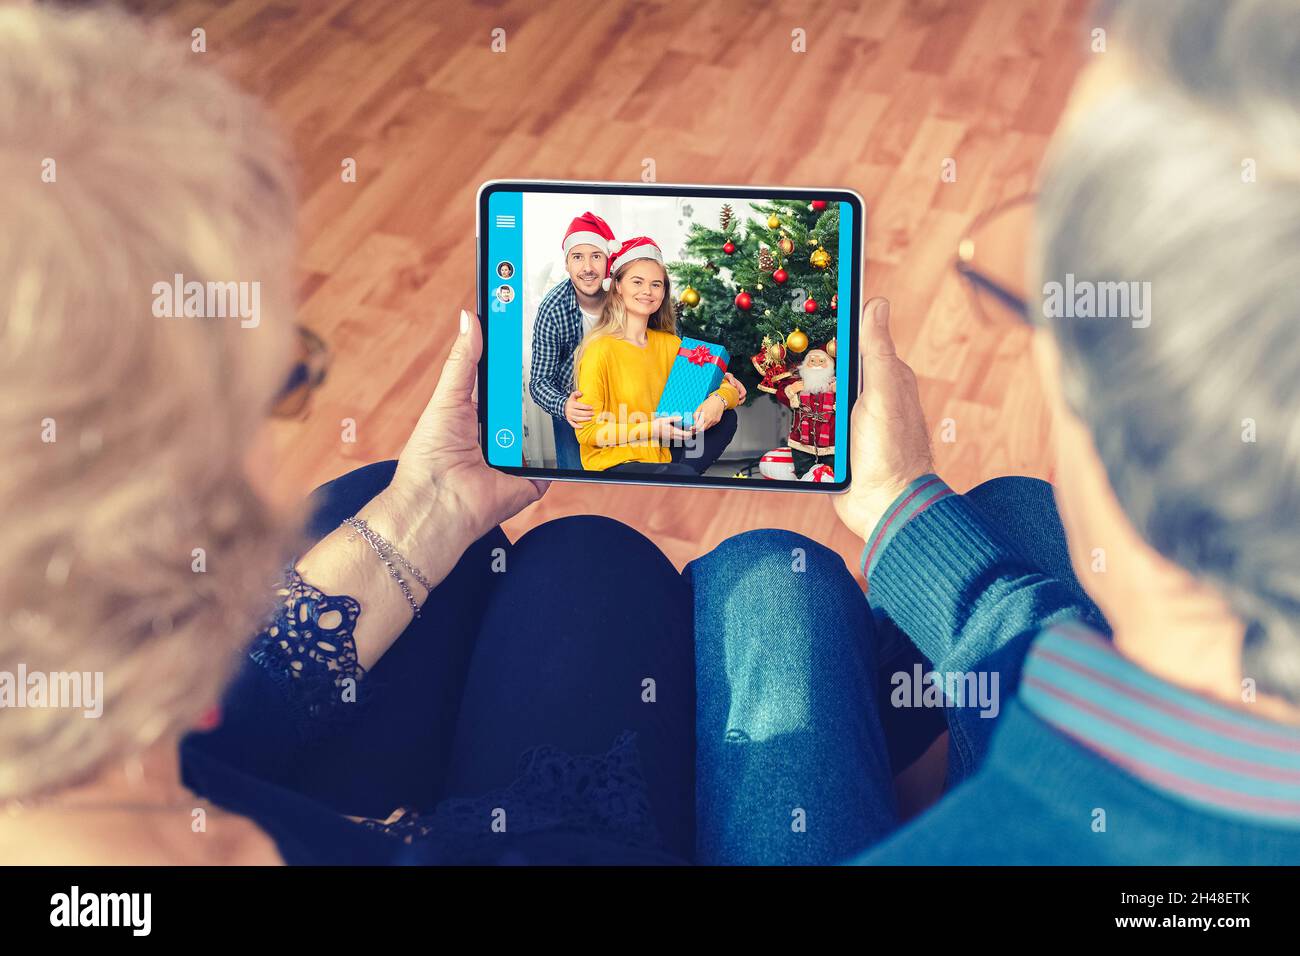 Family celebrating Christmas holidays online on videocall due to covid restrictions and lockdown Stock Photo